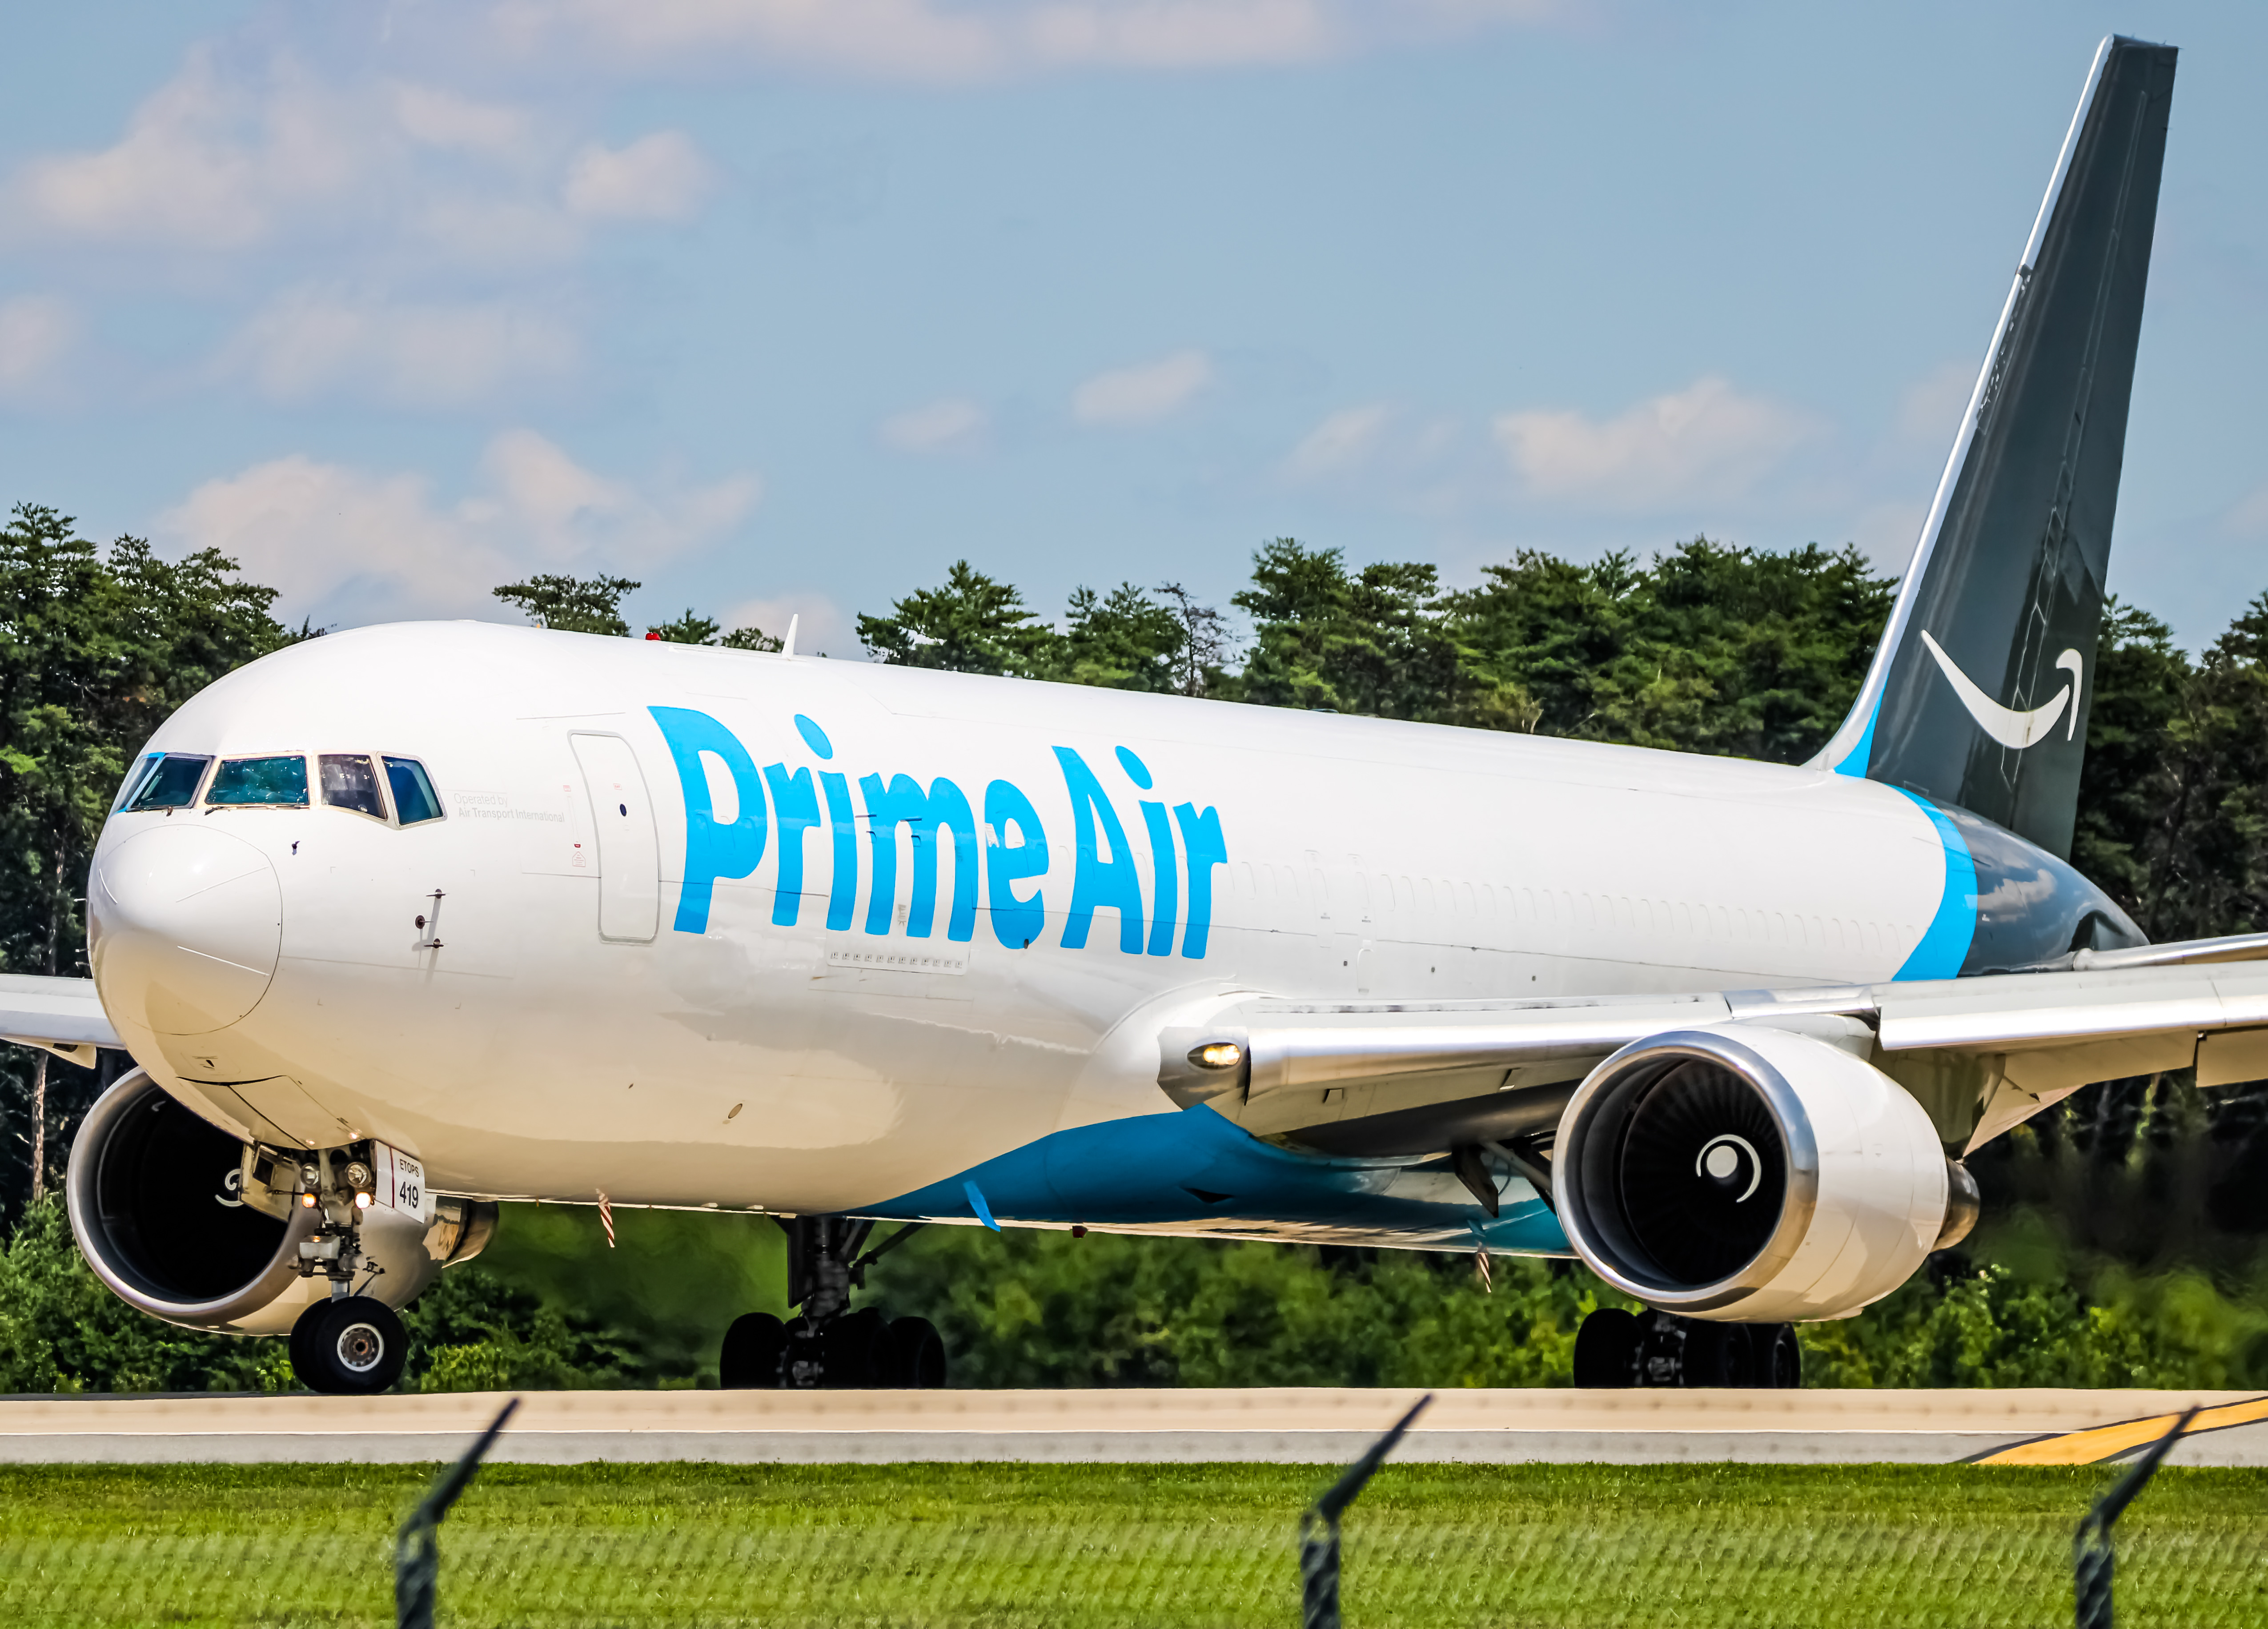 Amazon Air to Sell Surplus Capacity Onboard its Jets Ahead of Predicted Market Slump